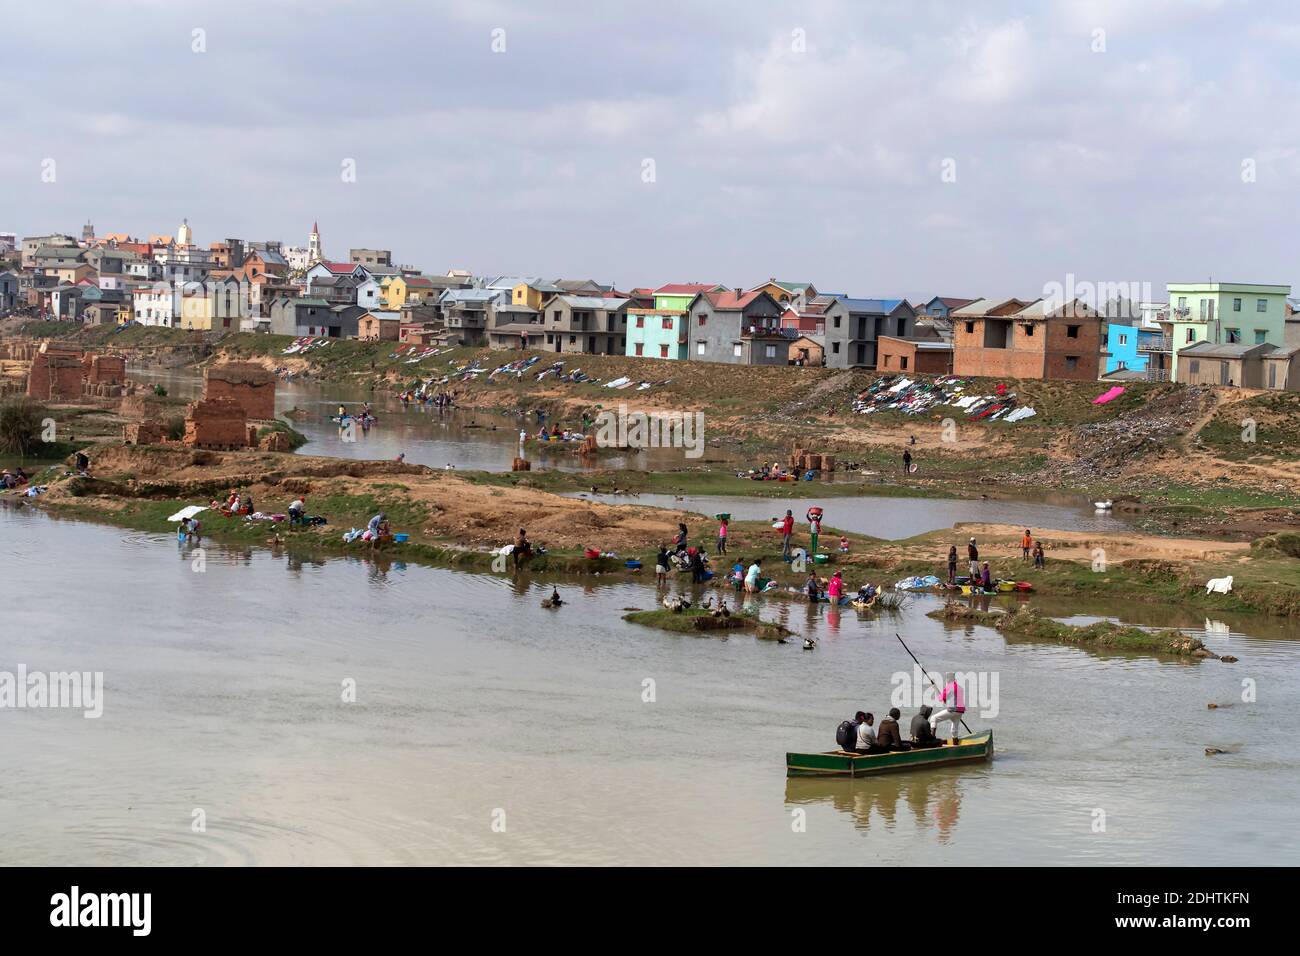 Washing clothes and transporting goods in Tananarivo, the capital of Madagascar. Stock Photo